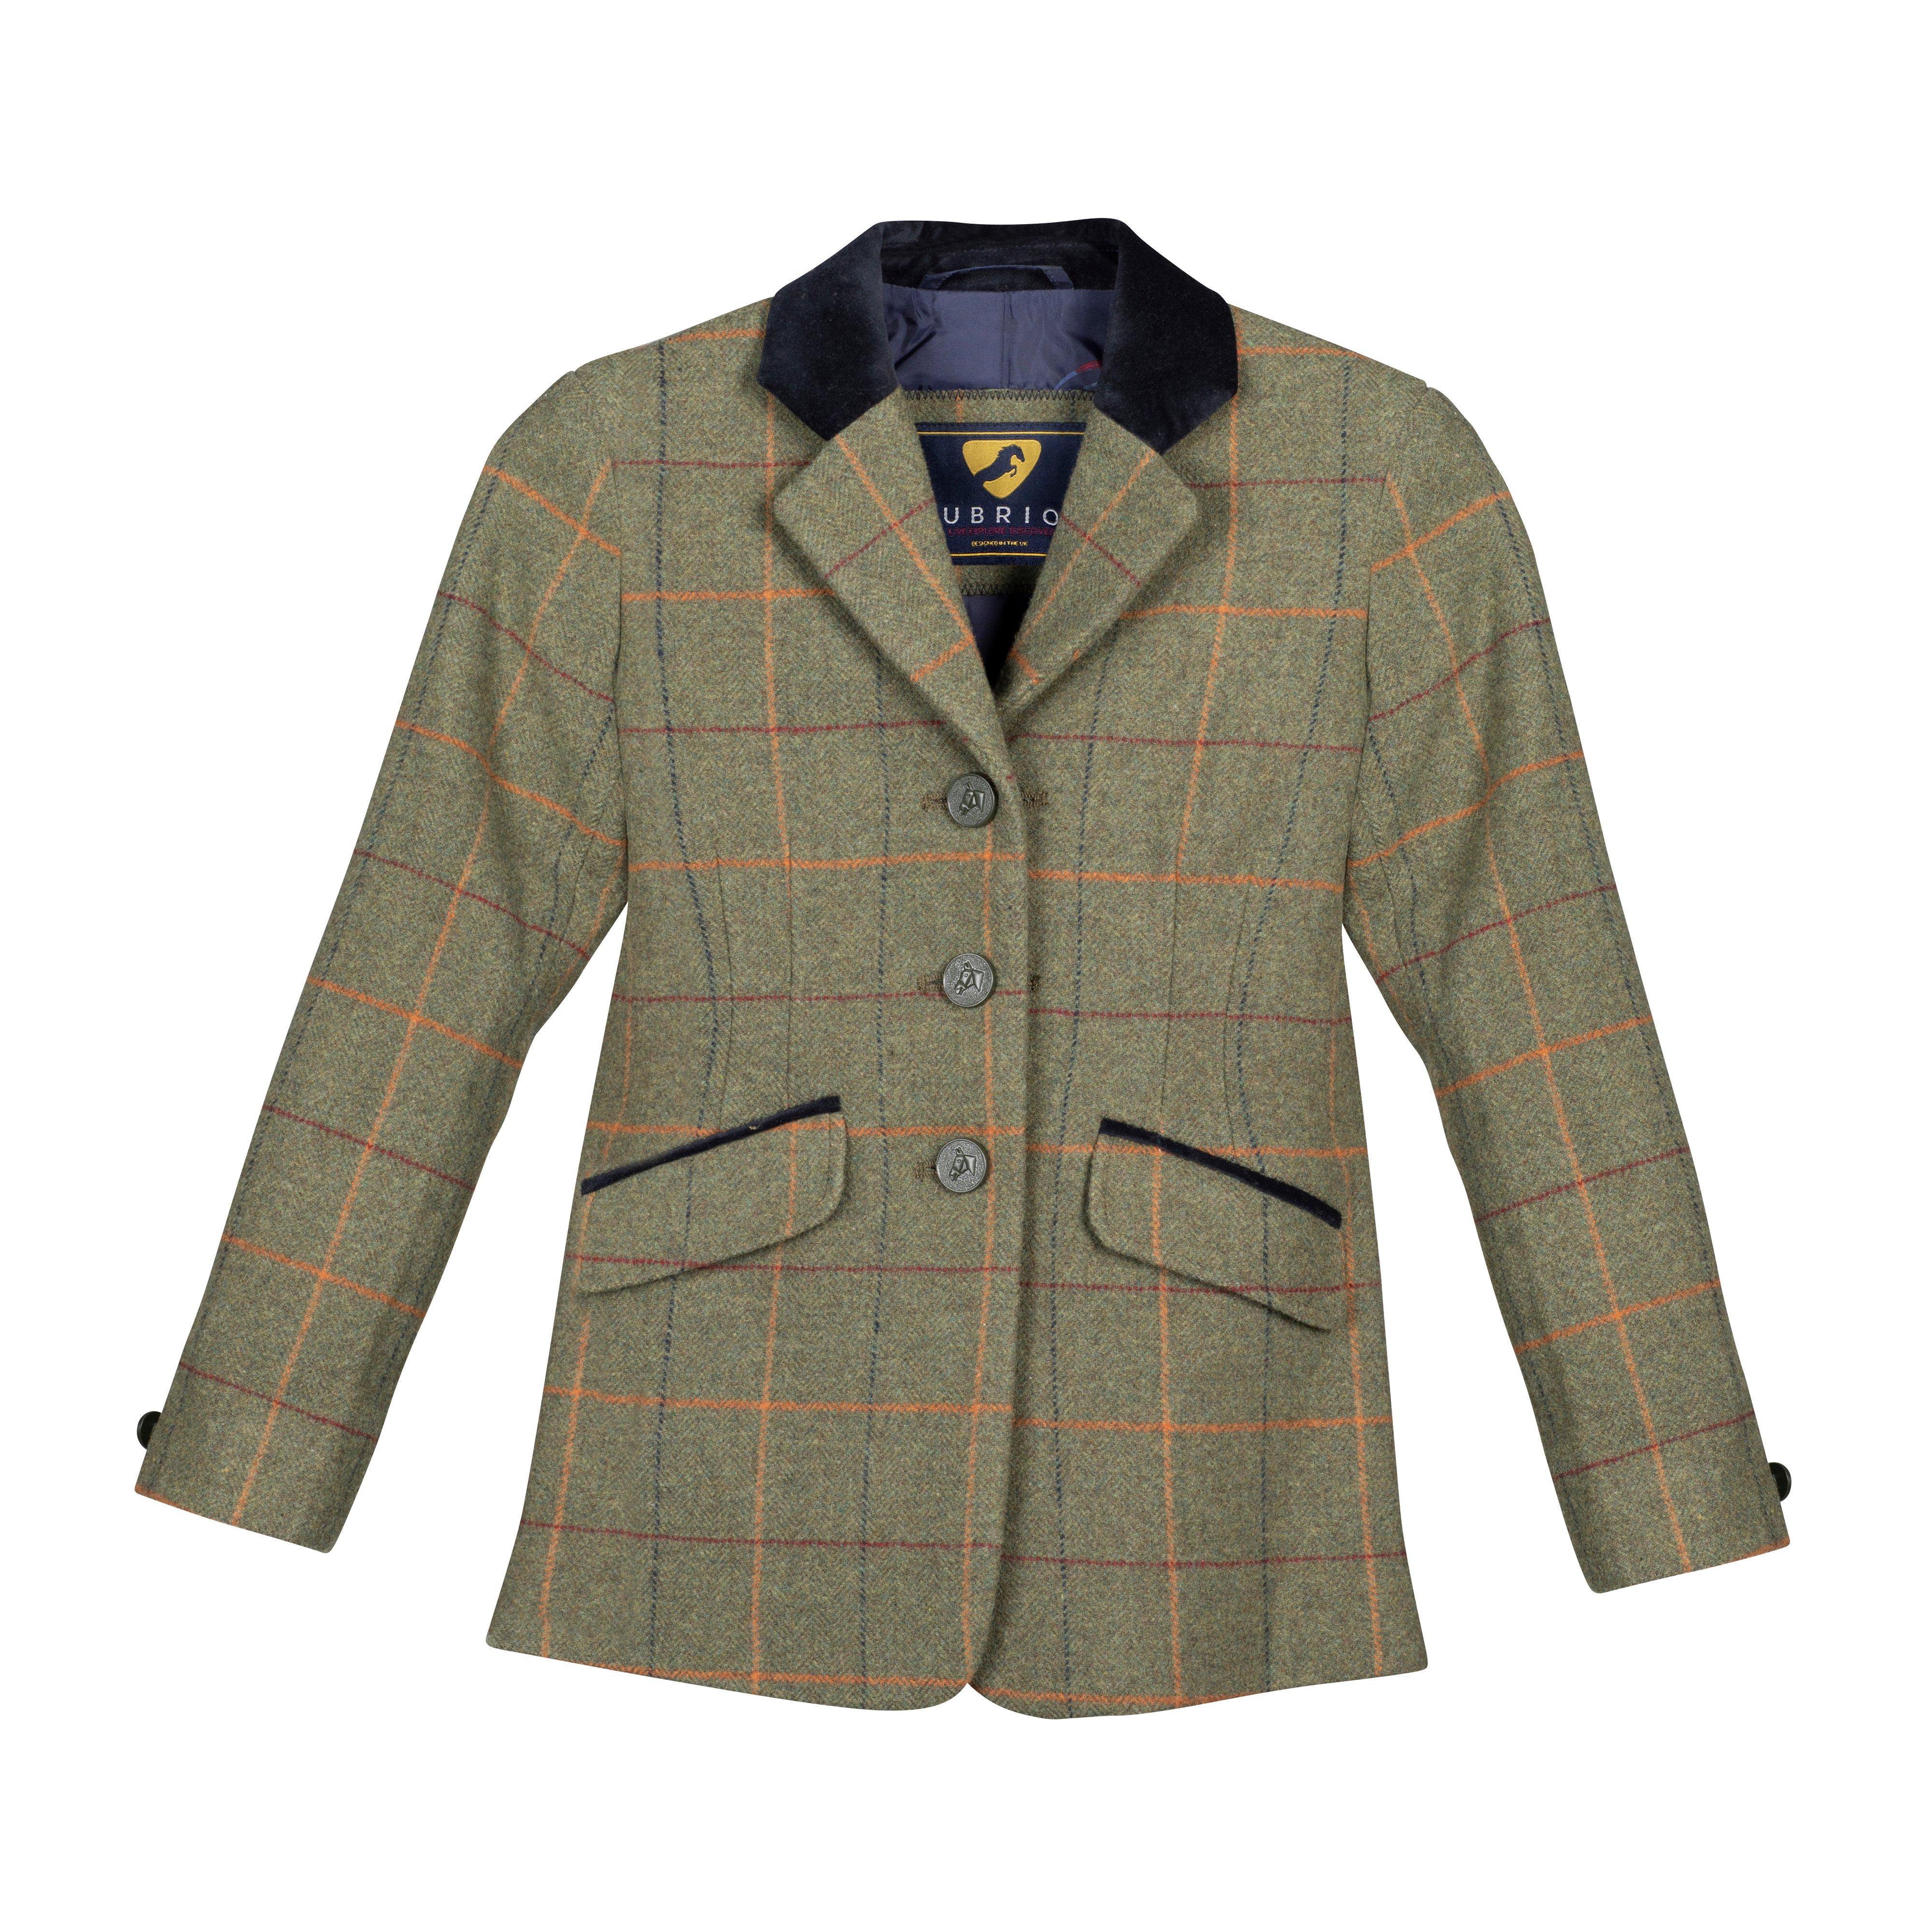 Childs Saratoga Tweed Jacket Red/Yellow/Blue Check